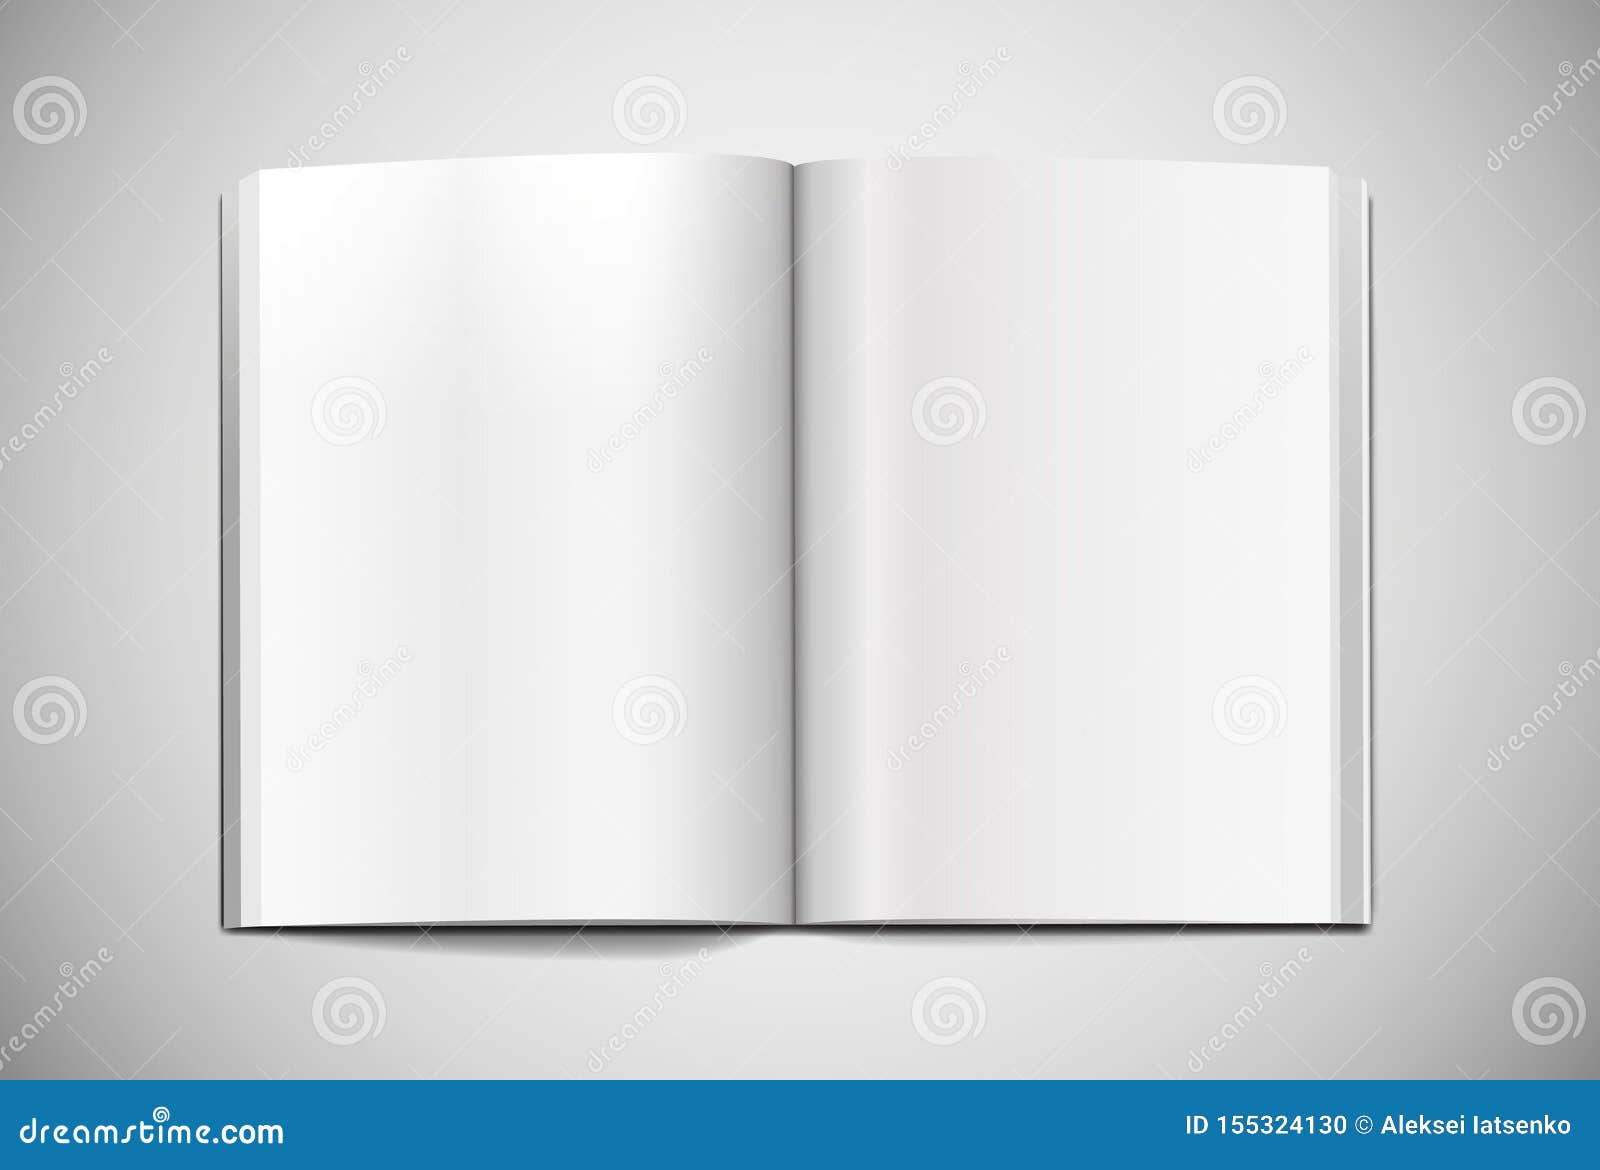 Magazine Mockup Spread Template Realistic Light Stock Vector Intended For Blank Magazine Spread Template